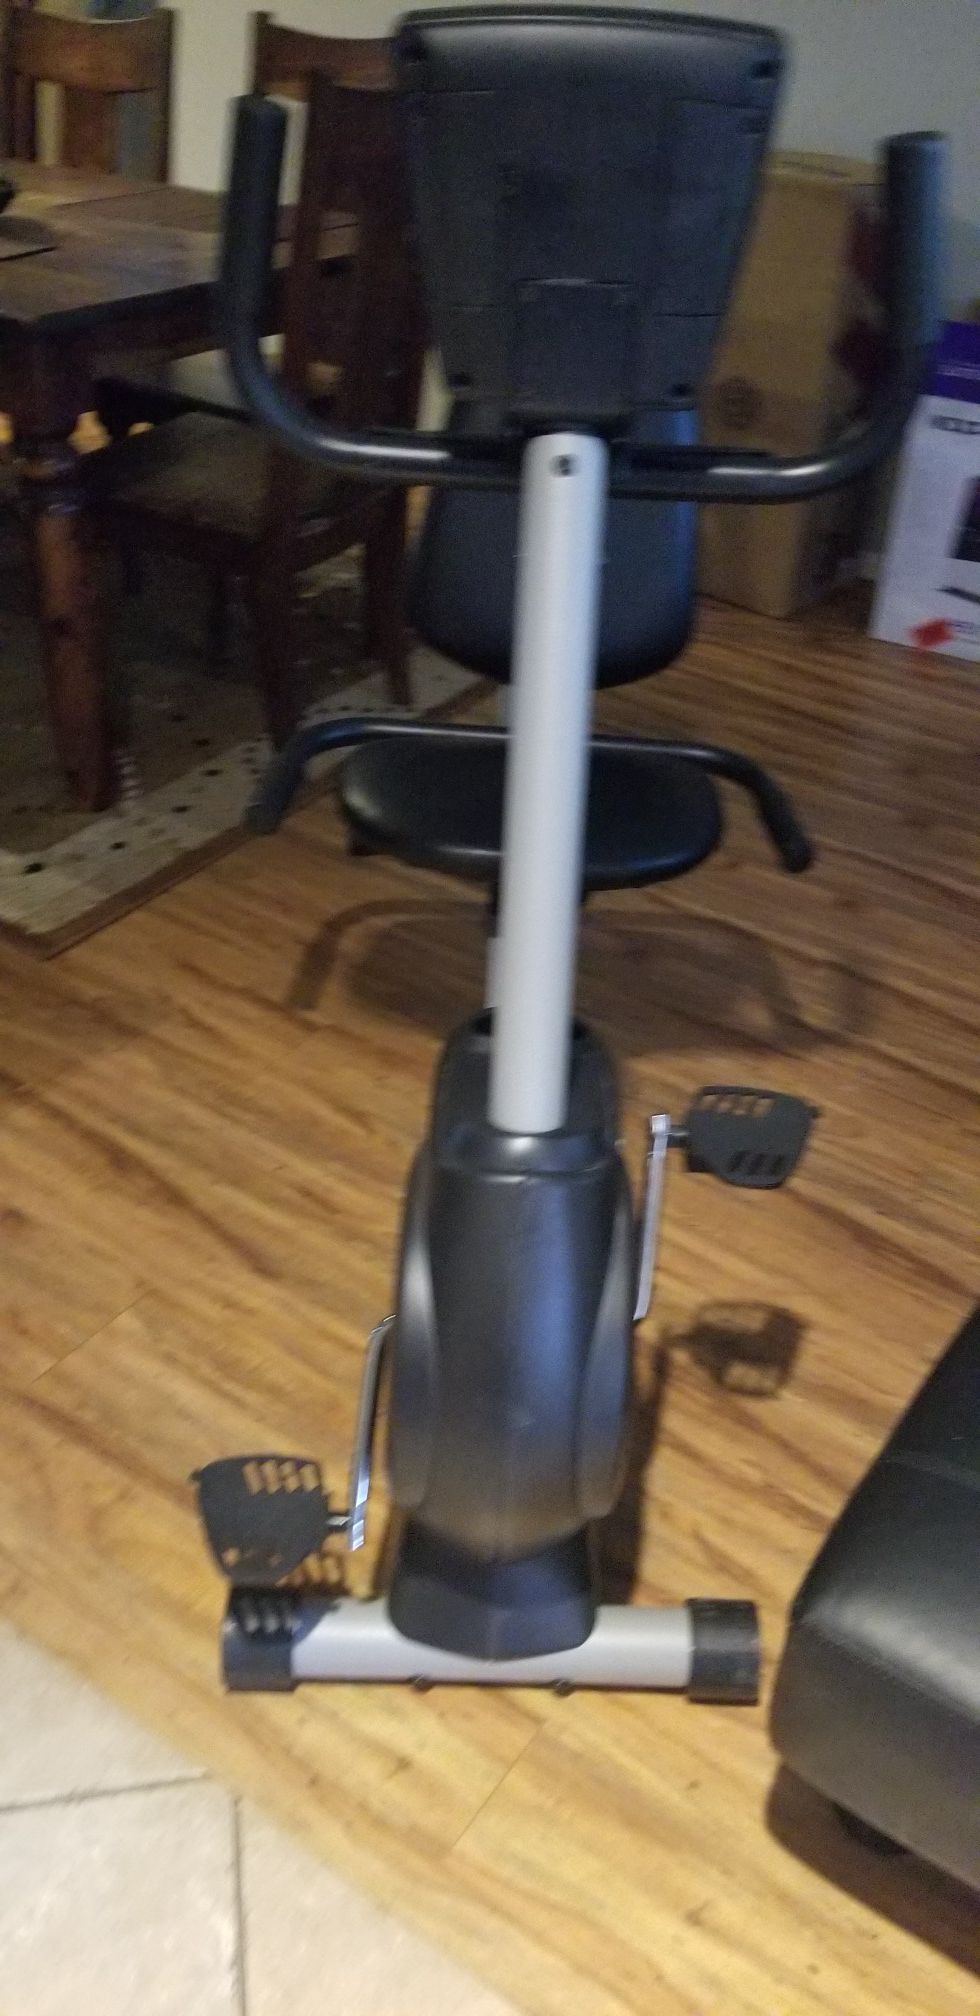 Exercise bike good condition everything works fine